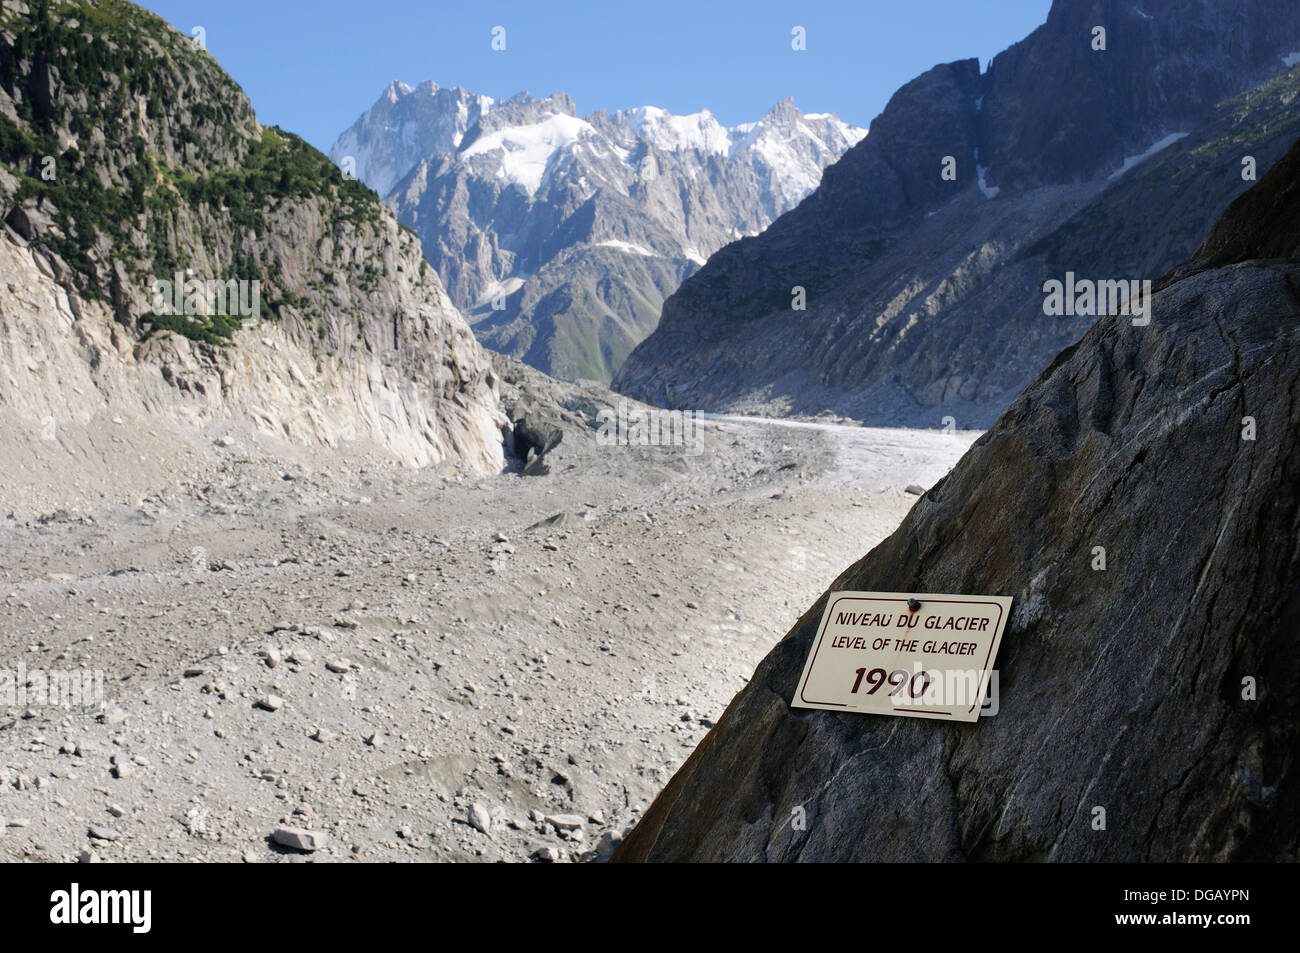 A sign showing the extent of glacial retreat recently - the Mer de Glace now far below the sign showing the level in 1990 Stock Photo